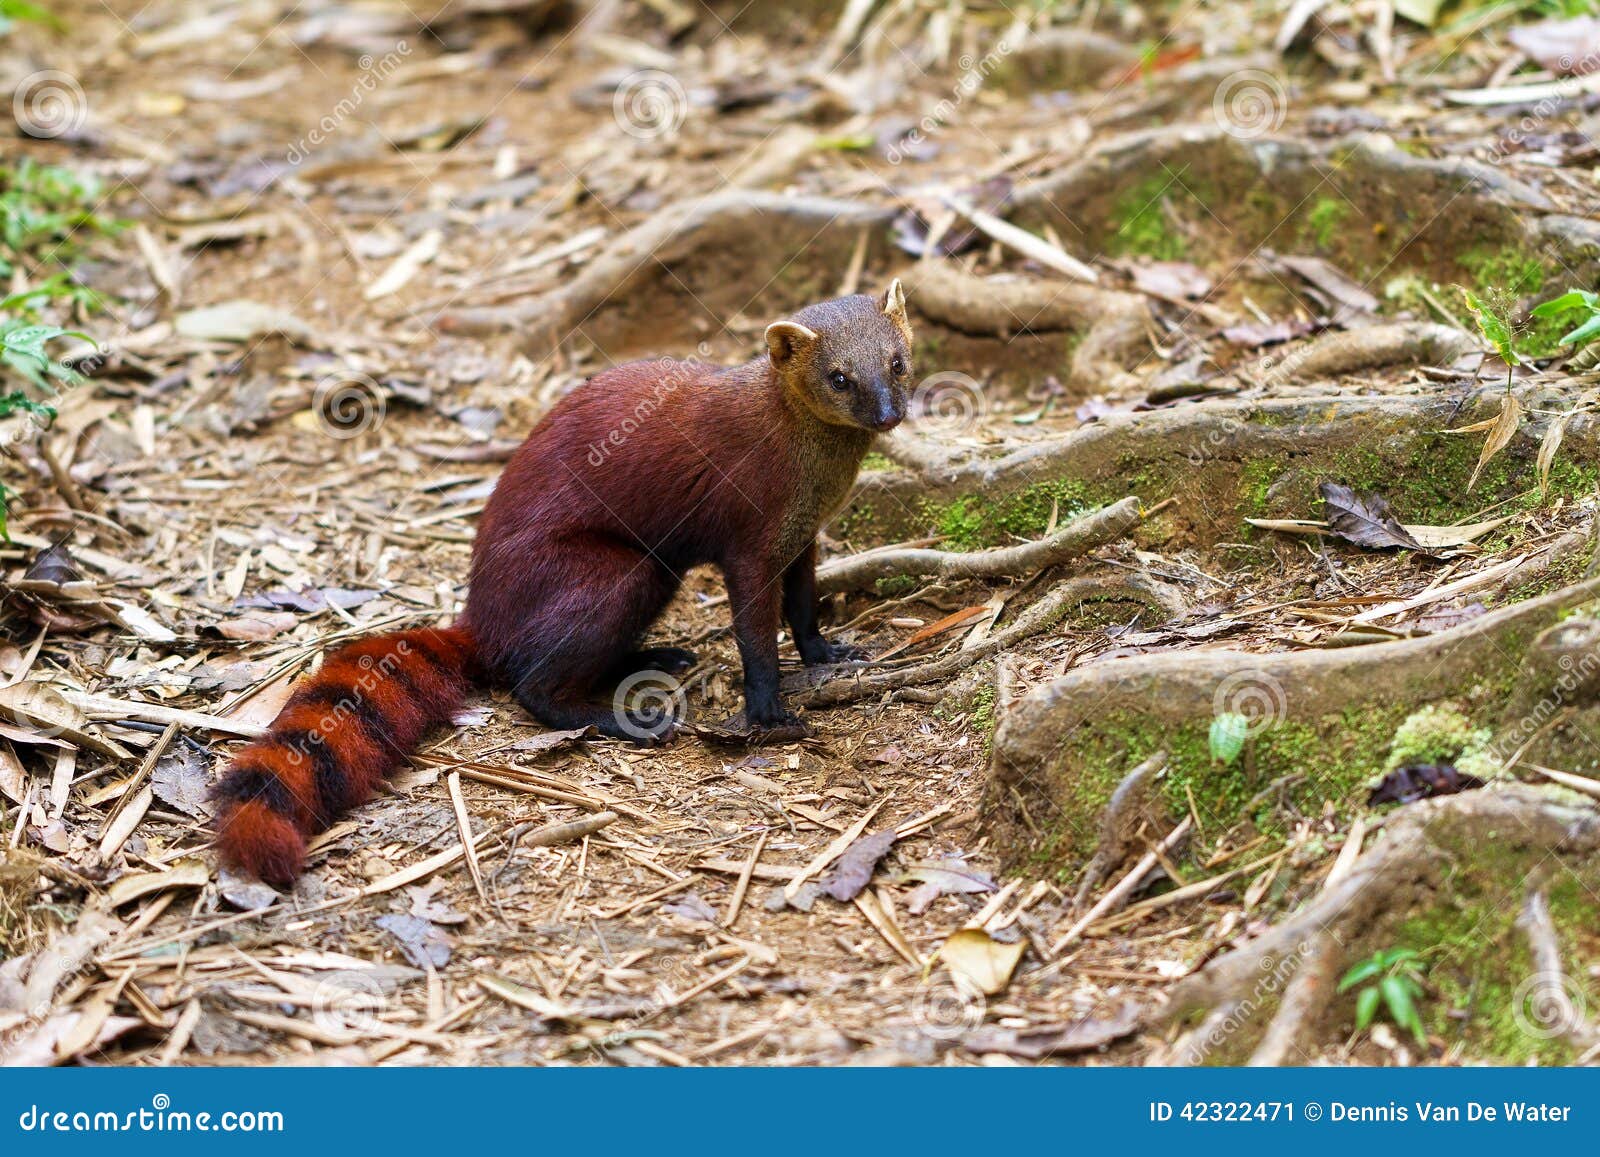 the ring-tailed mongoose